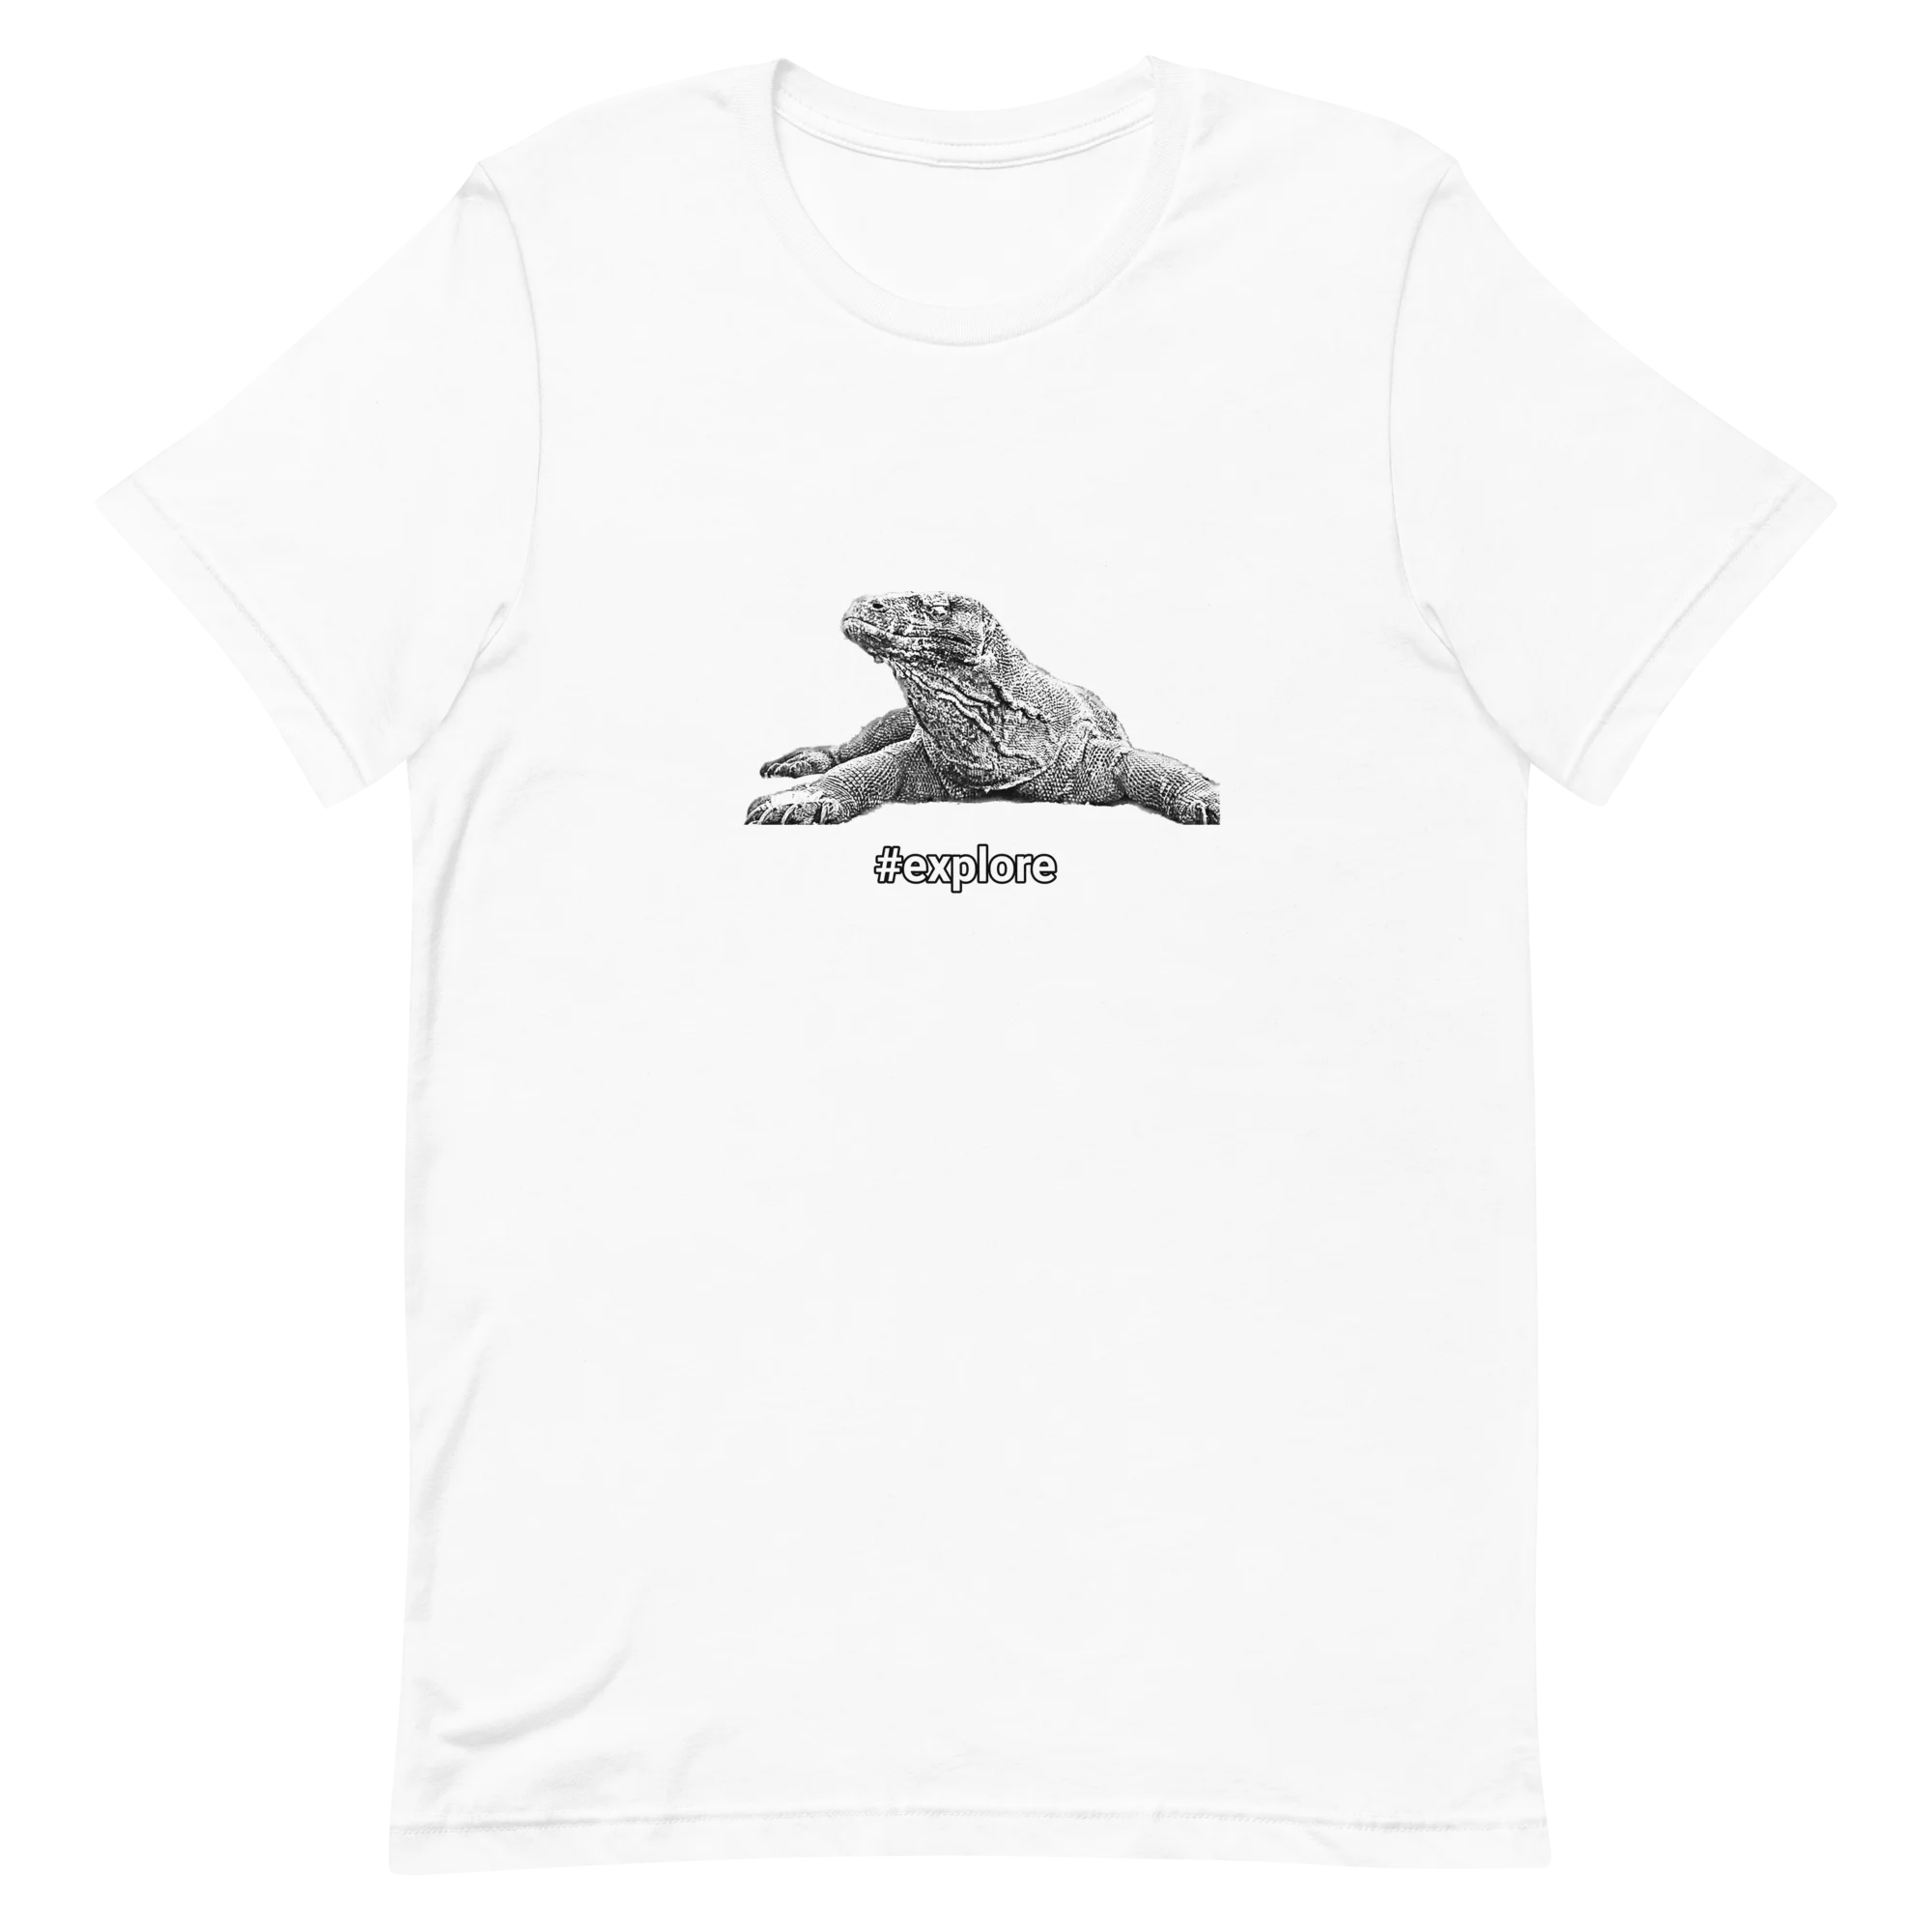 T-Shirt featuring an image of a komodo